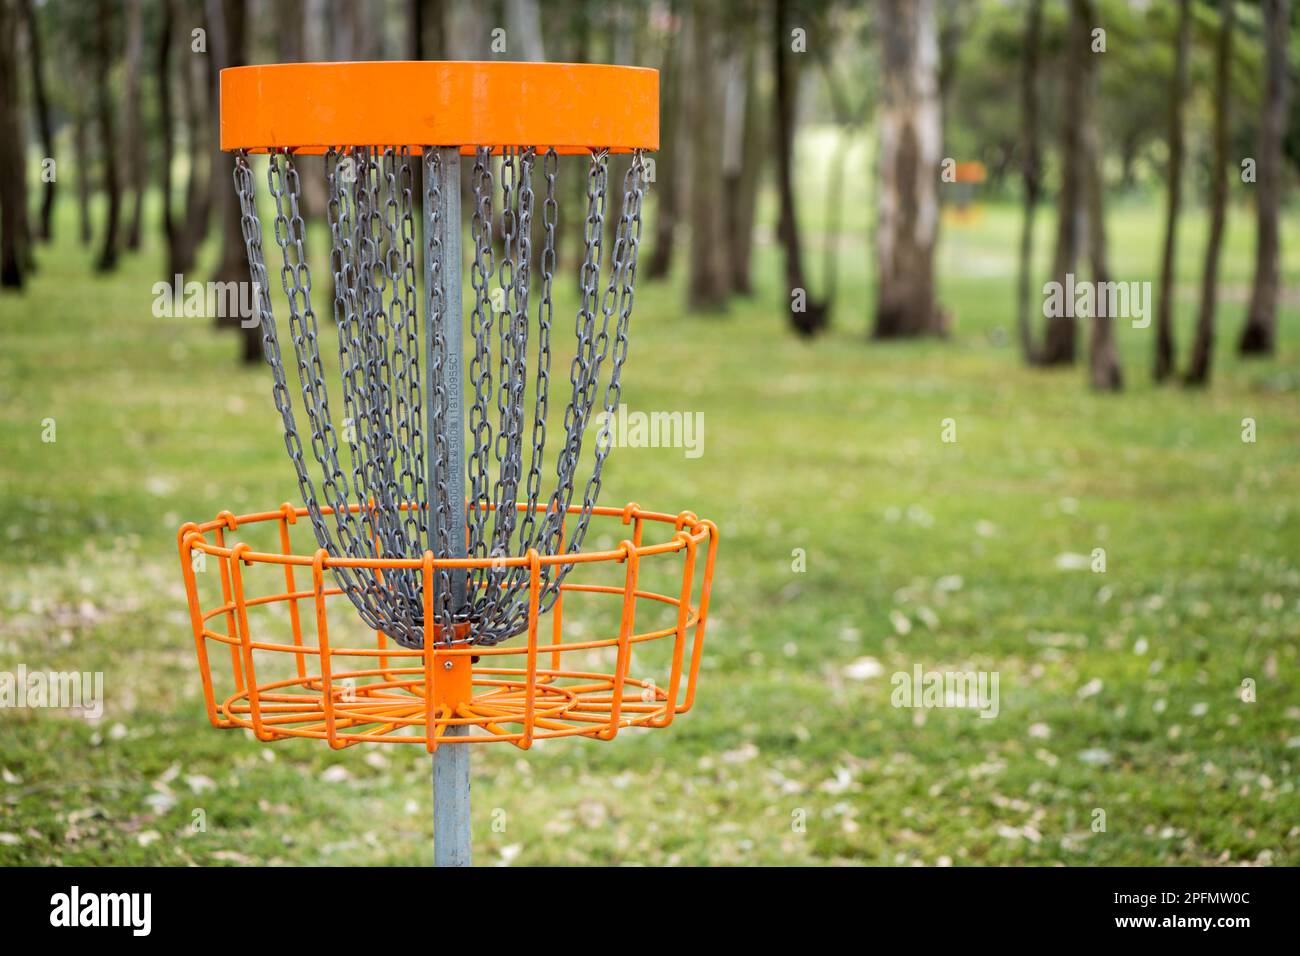 Closeup of disc golf (frolf) basket in a park obstacle course with a shallow depth of field Stock Photo